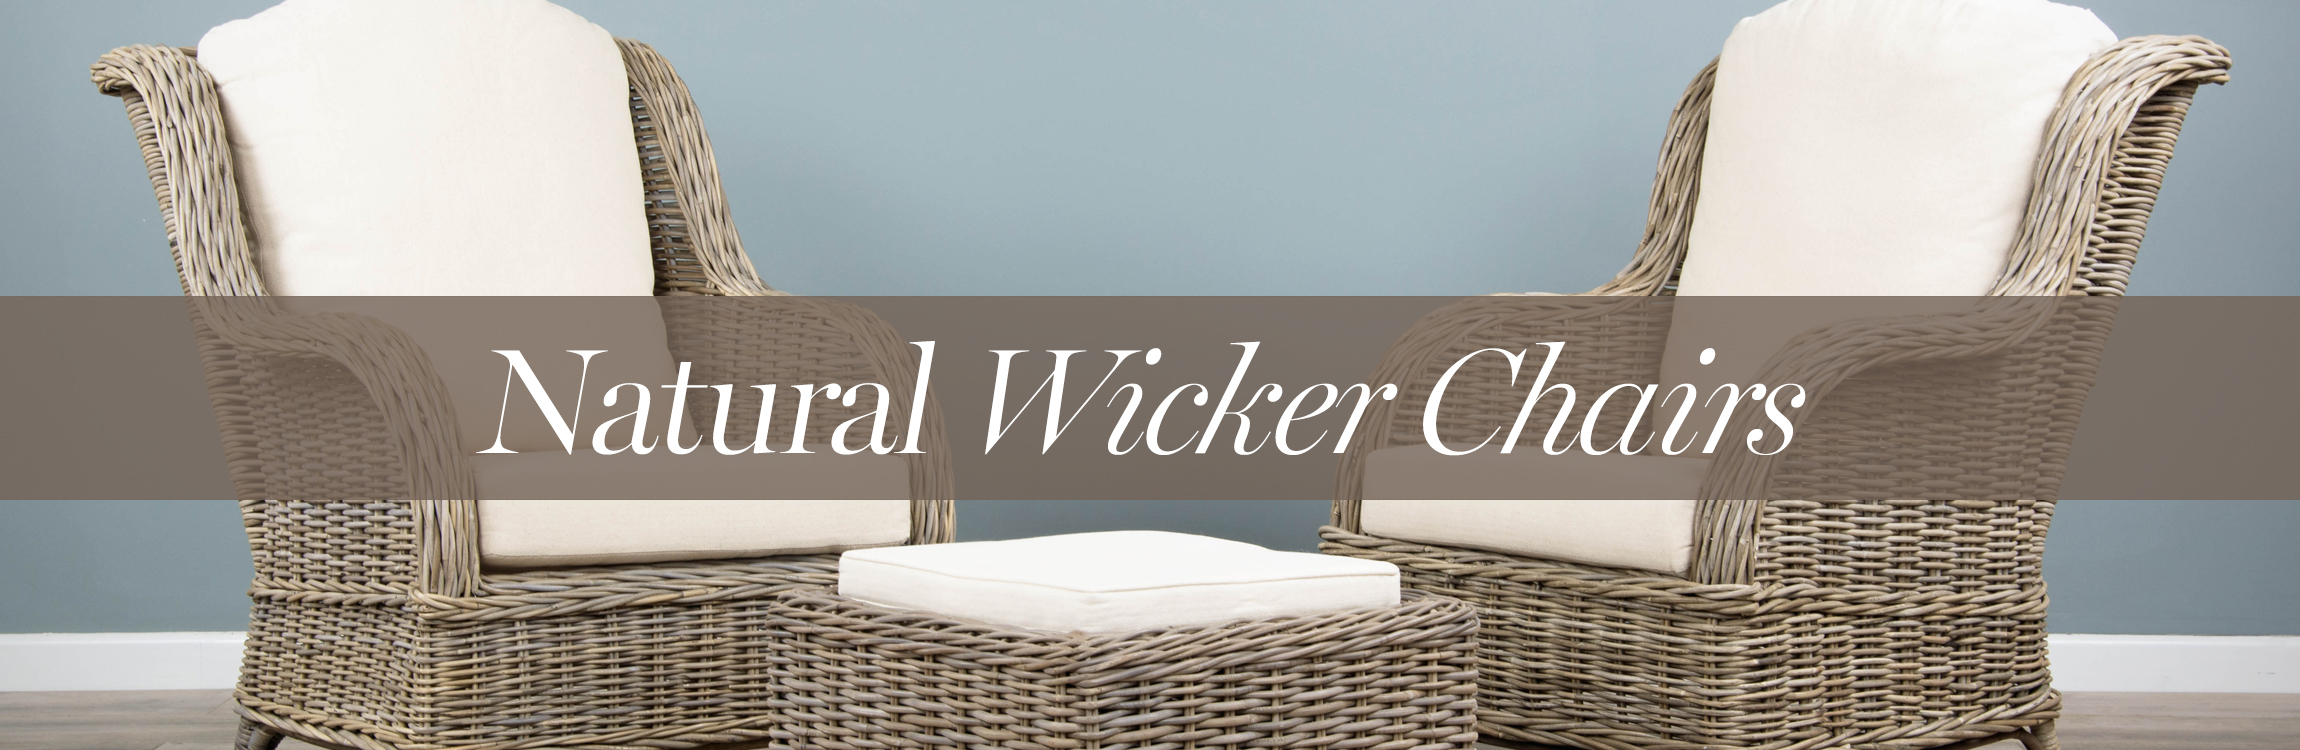 Natural Wicker Chairs - Sustainable Furniture